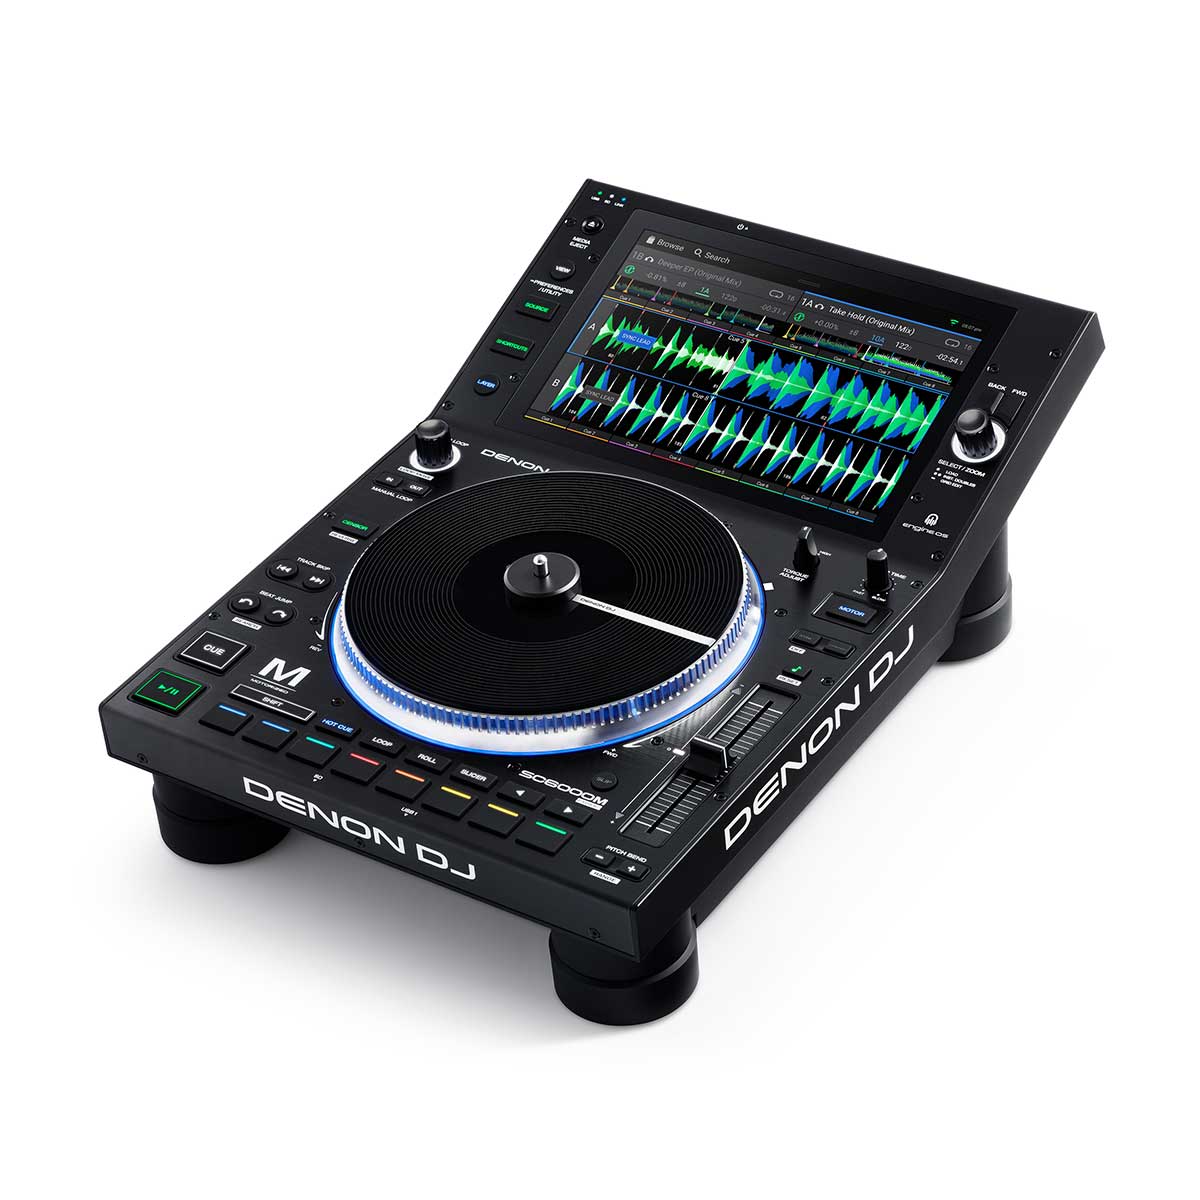 Denon Professional DJ Media Player with 8.5" Motorized Platter and 10.1" Touchscreen